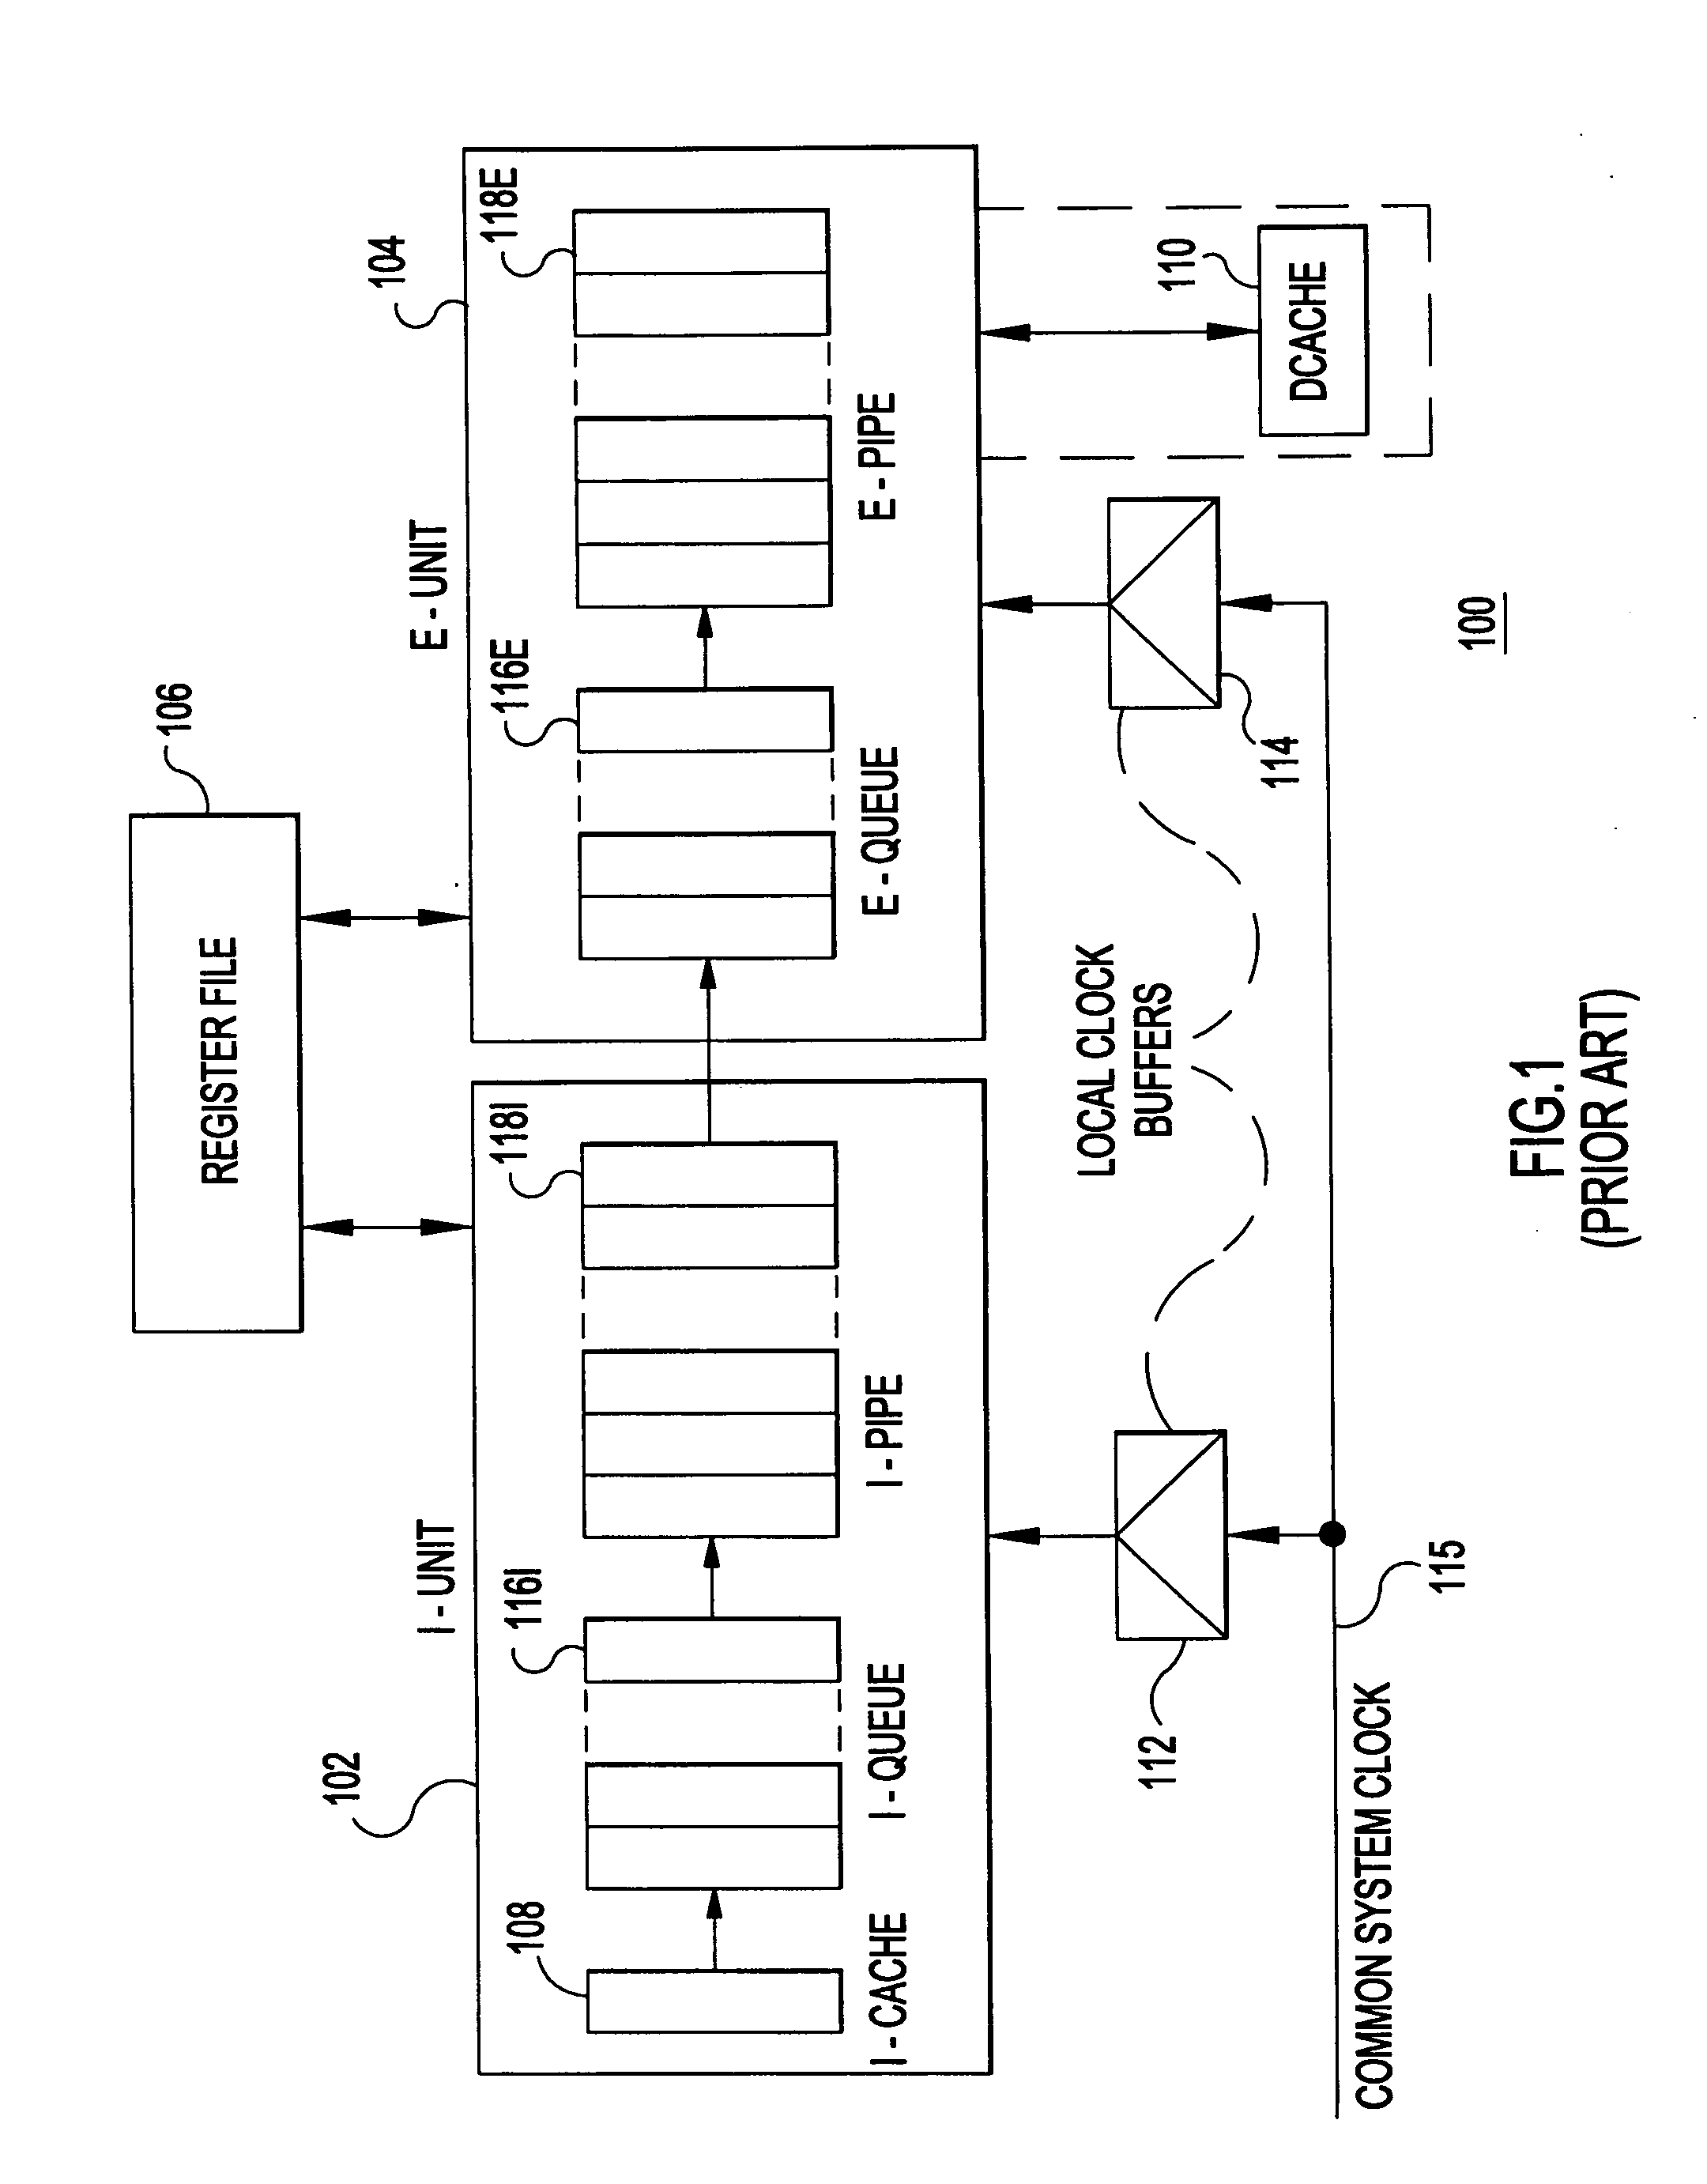 Processor with demand-driven clock throttling power reduction